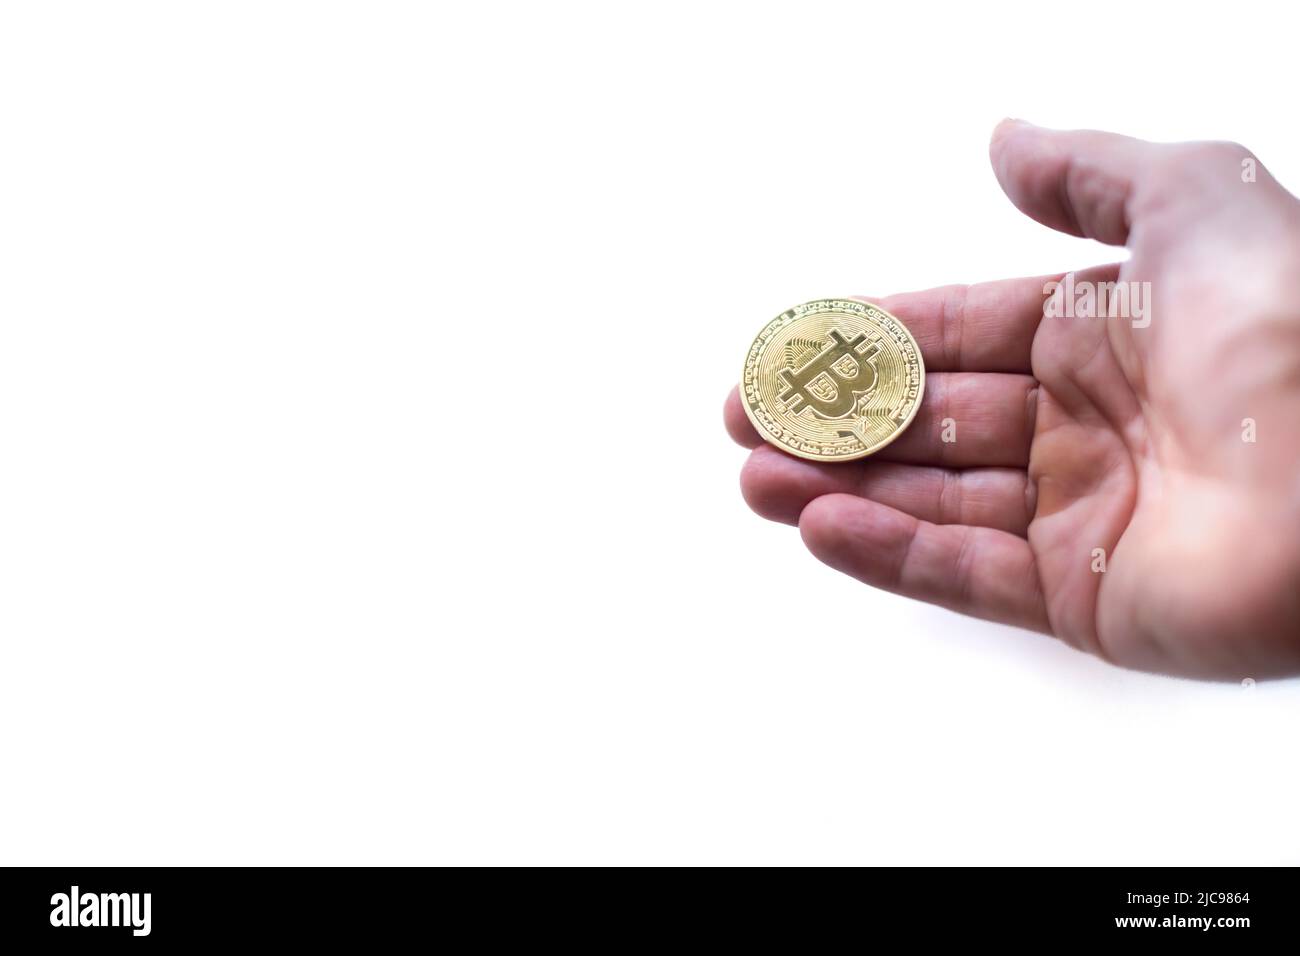 a hand holding a bit coin, as in a position to receive or accept a cryptocurrency as a payment form, white background, selective focus on the coin Stock Photo